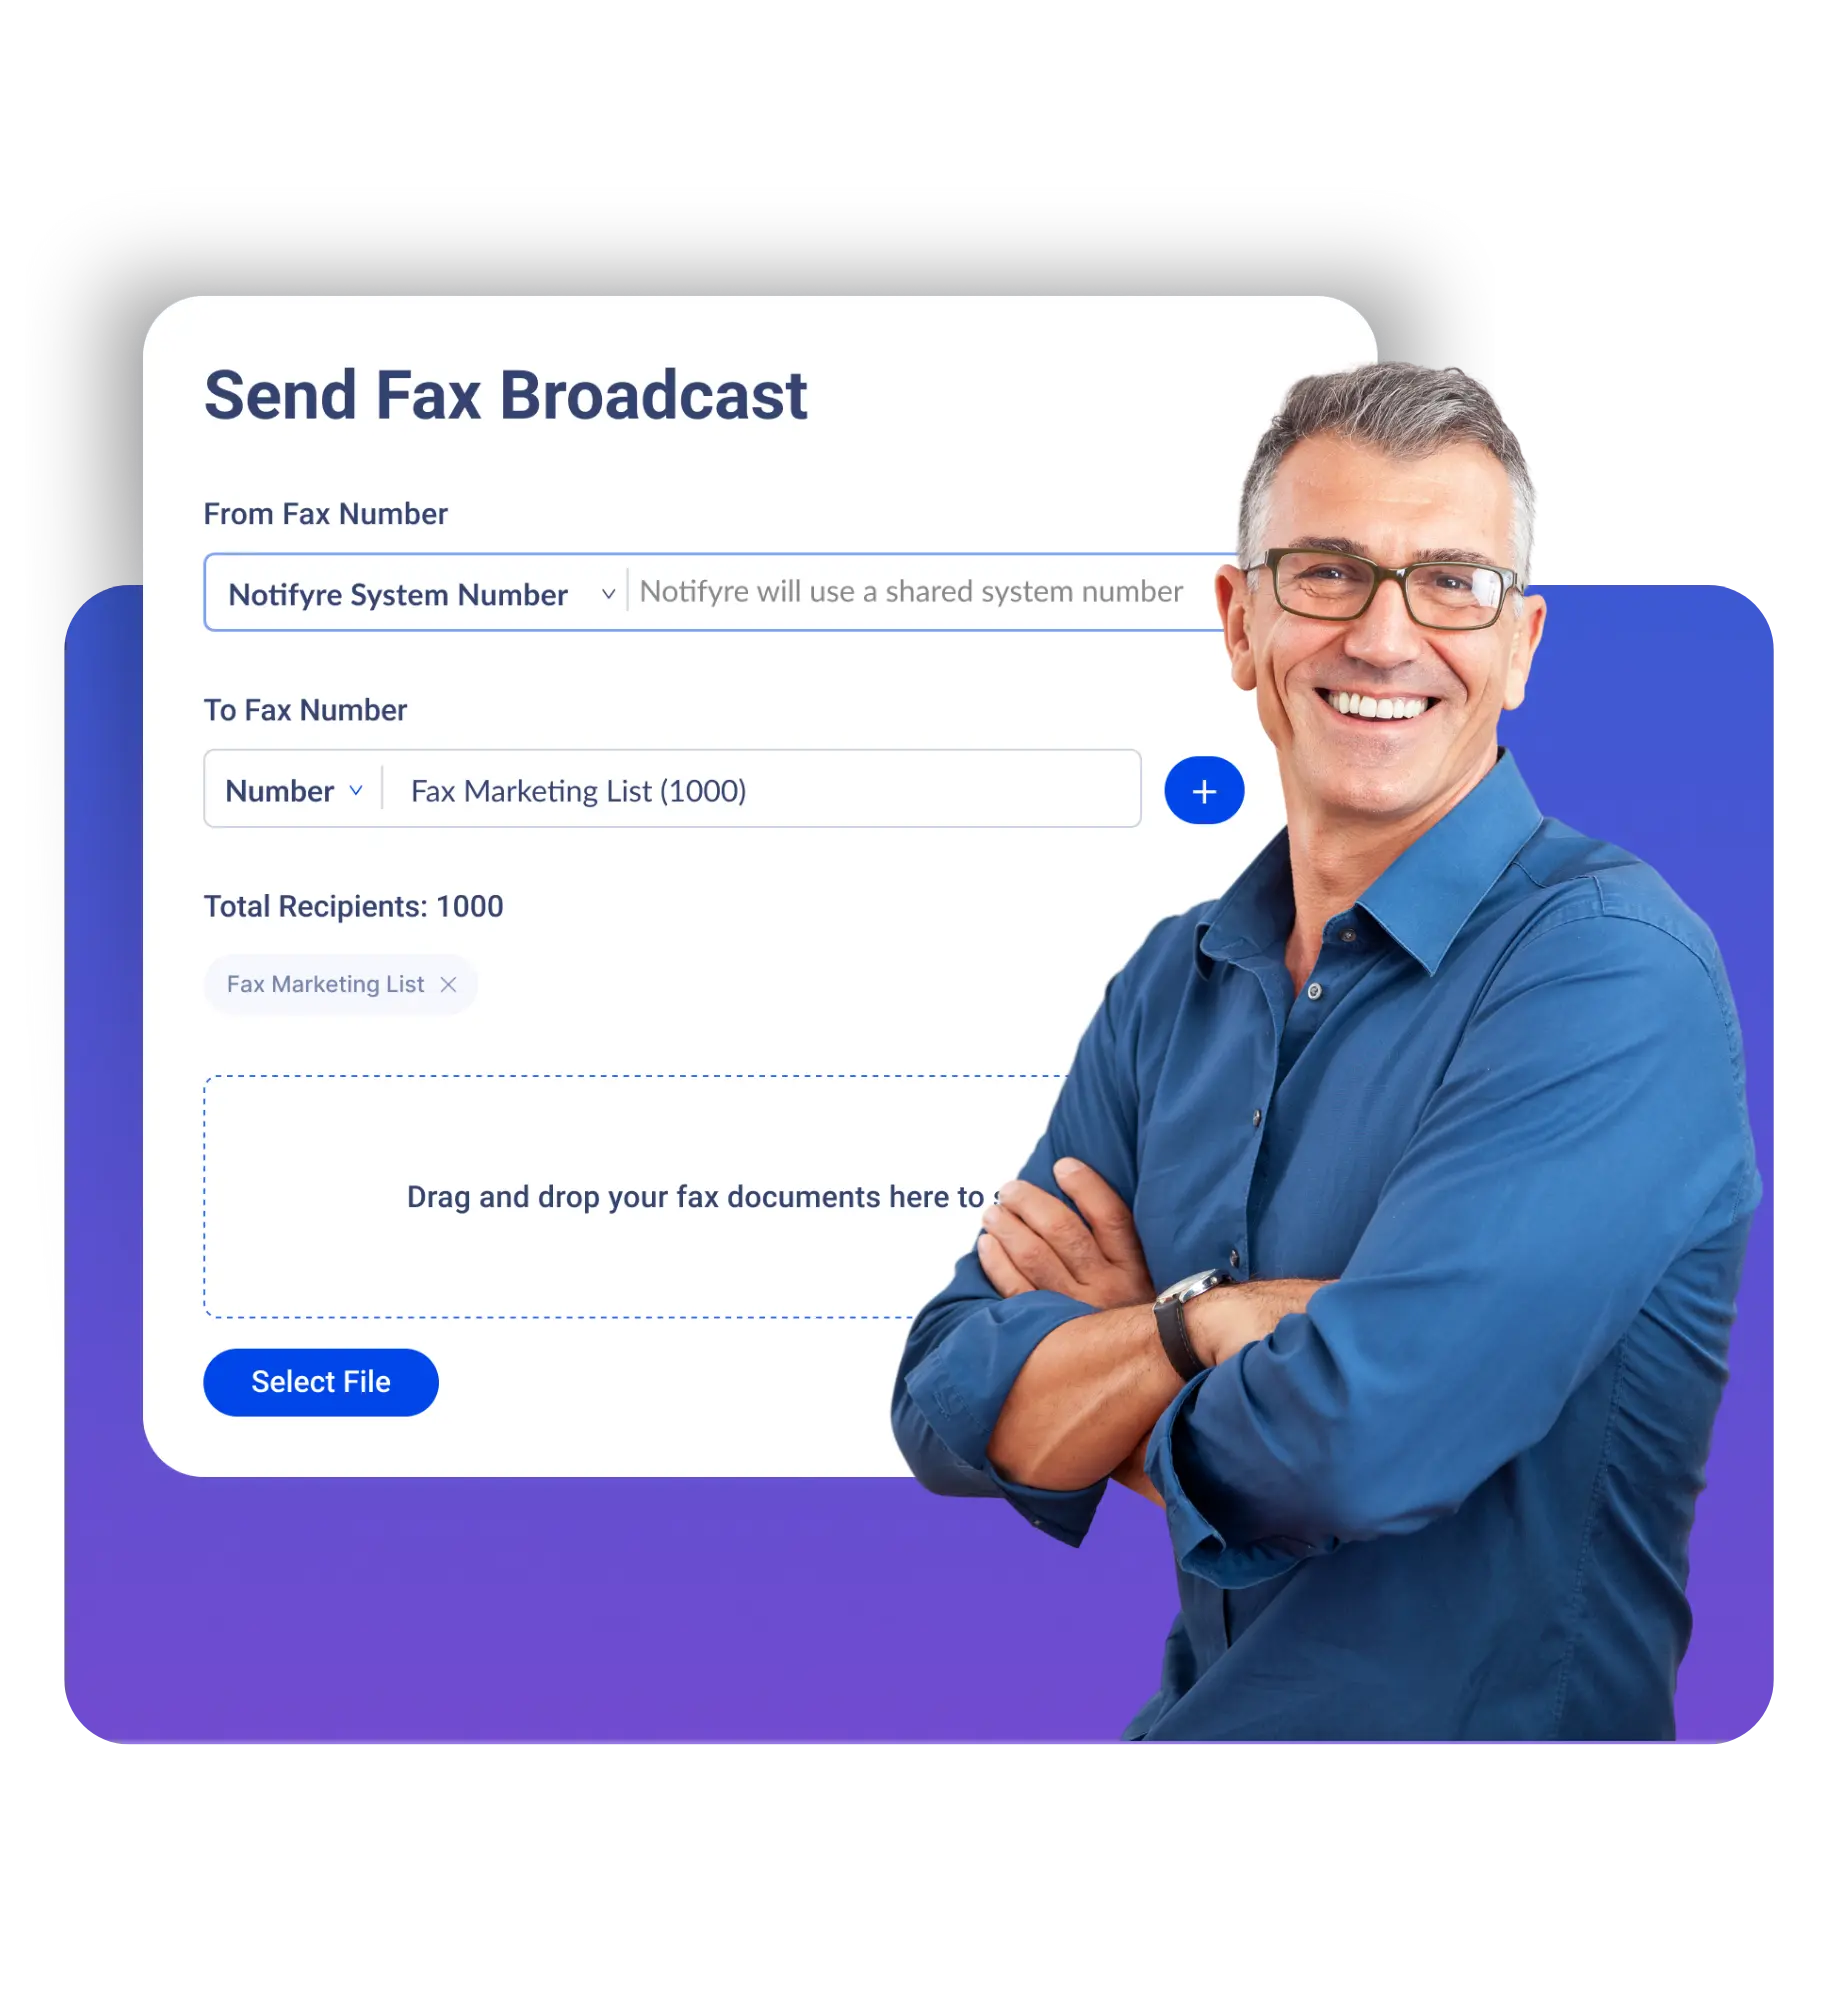 Notifyre's "Send Fax Broadcast" interface with options for selecting fax numbers, adding recipients, and uploading documents. A smiling man in a blue shirt stands to the right against a purple background.